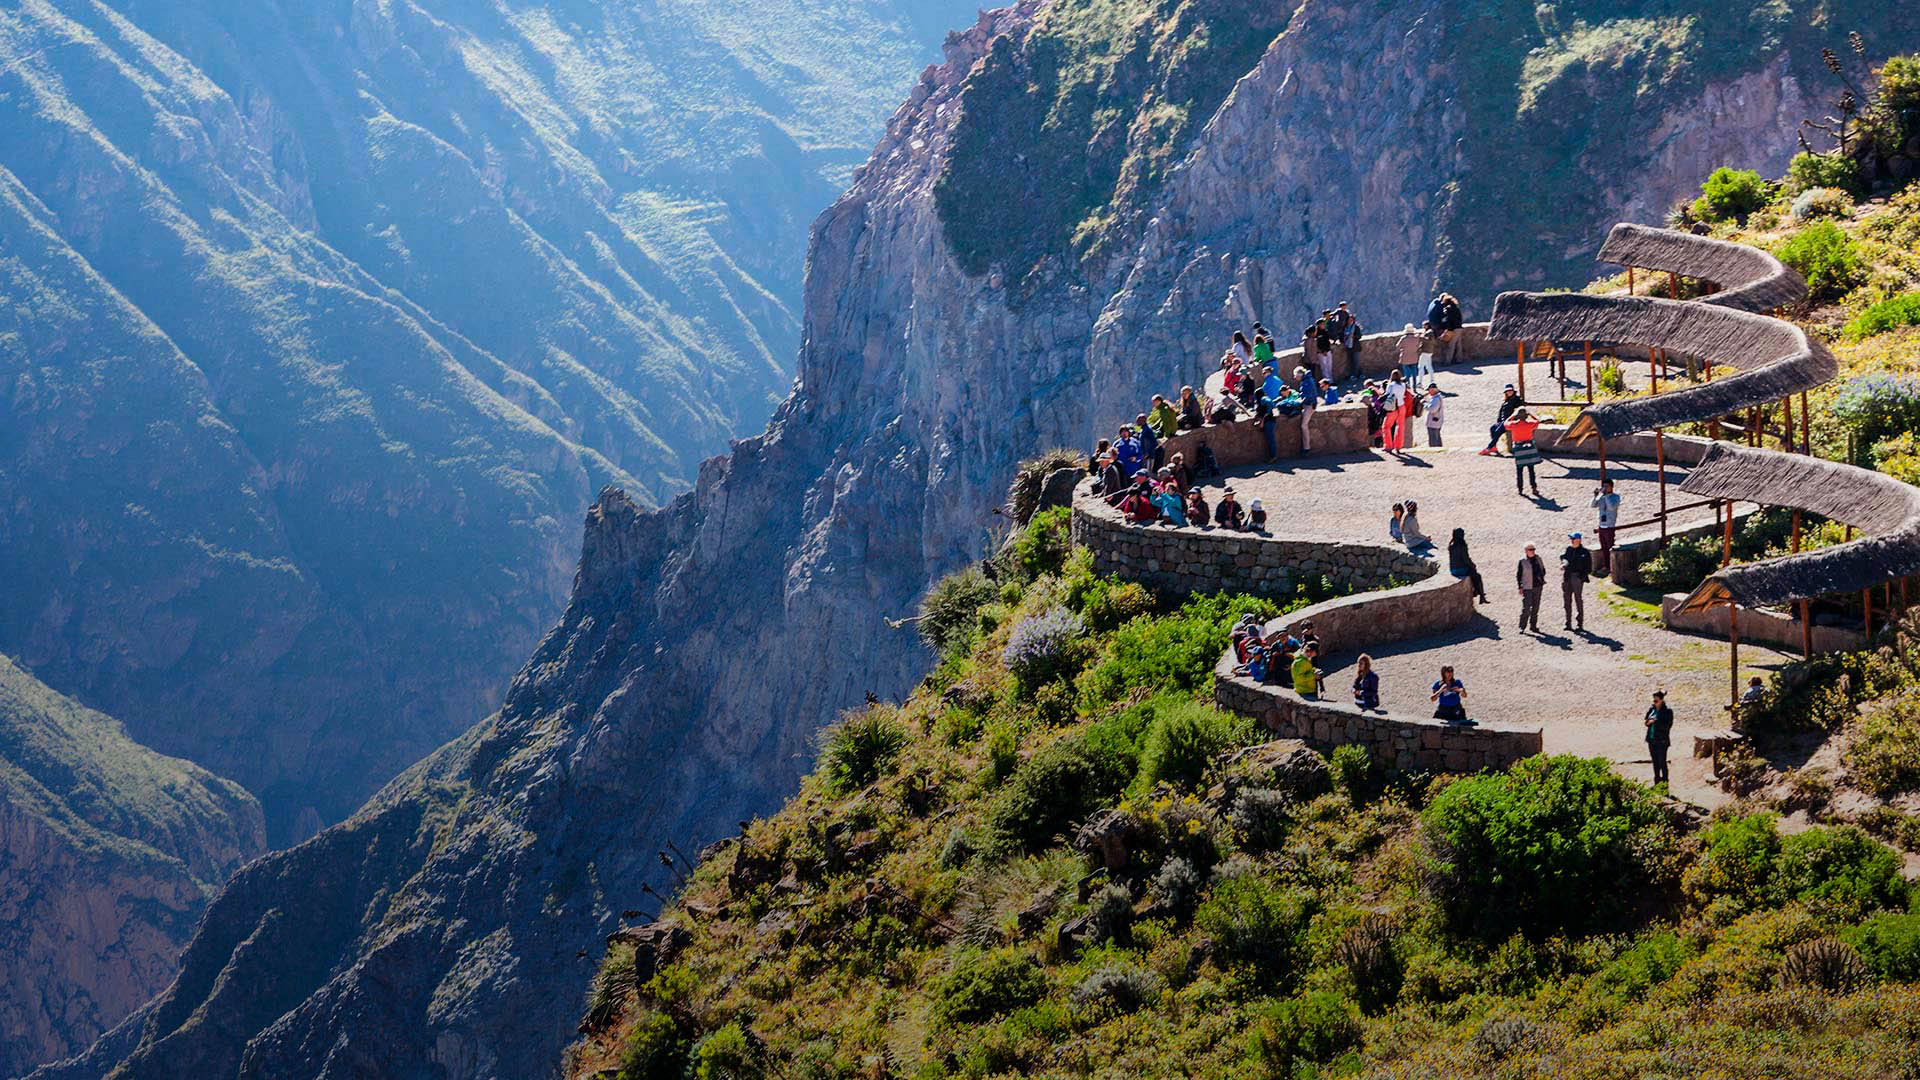 Visit to the Colca Canyon